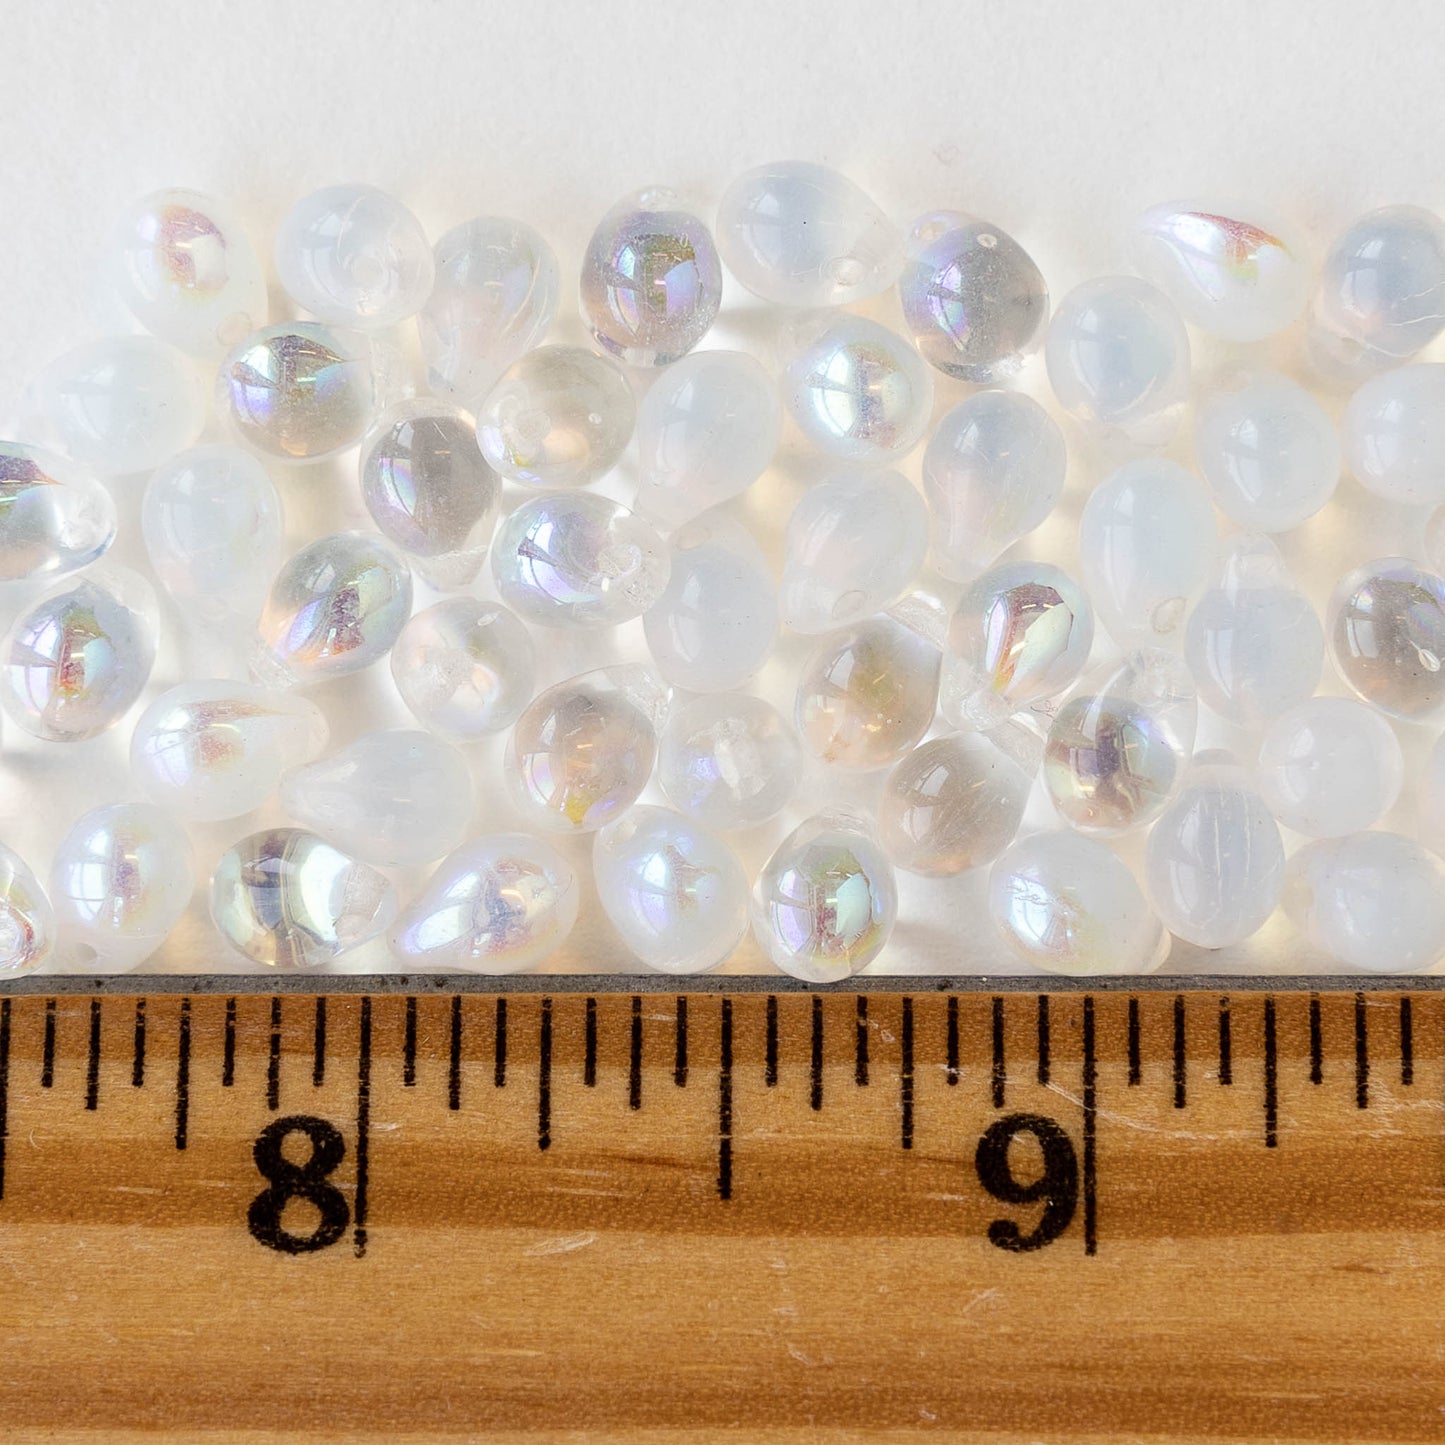 Load image into Gallery viewer, 5x7mm Glass Teardrop Beads - Pearly Opal AB - 50 Beads
